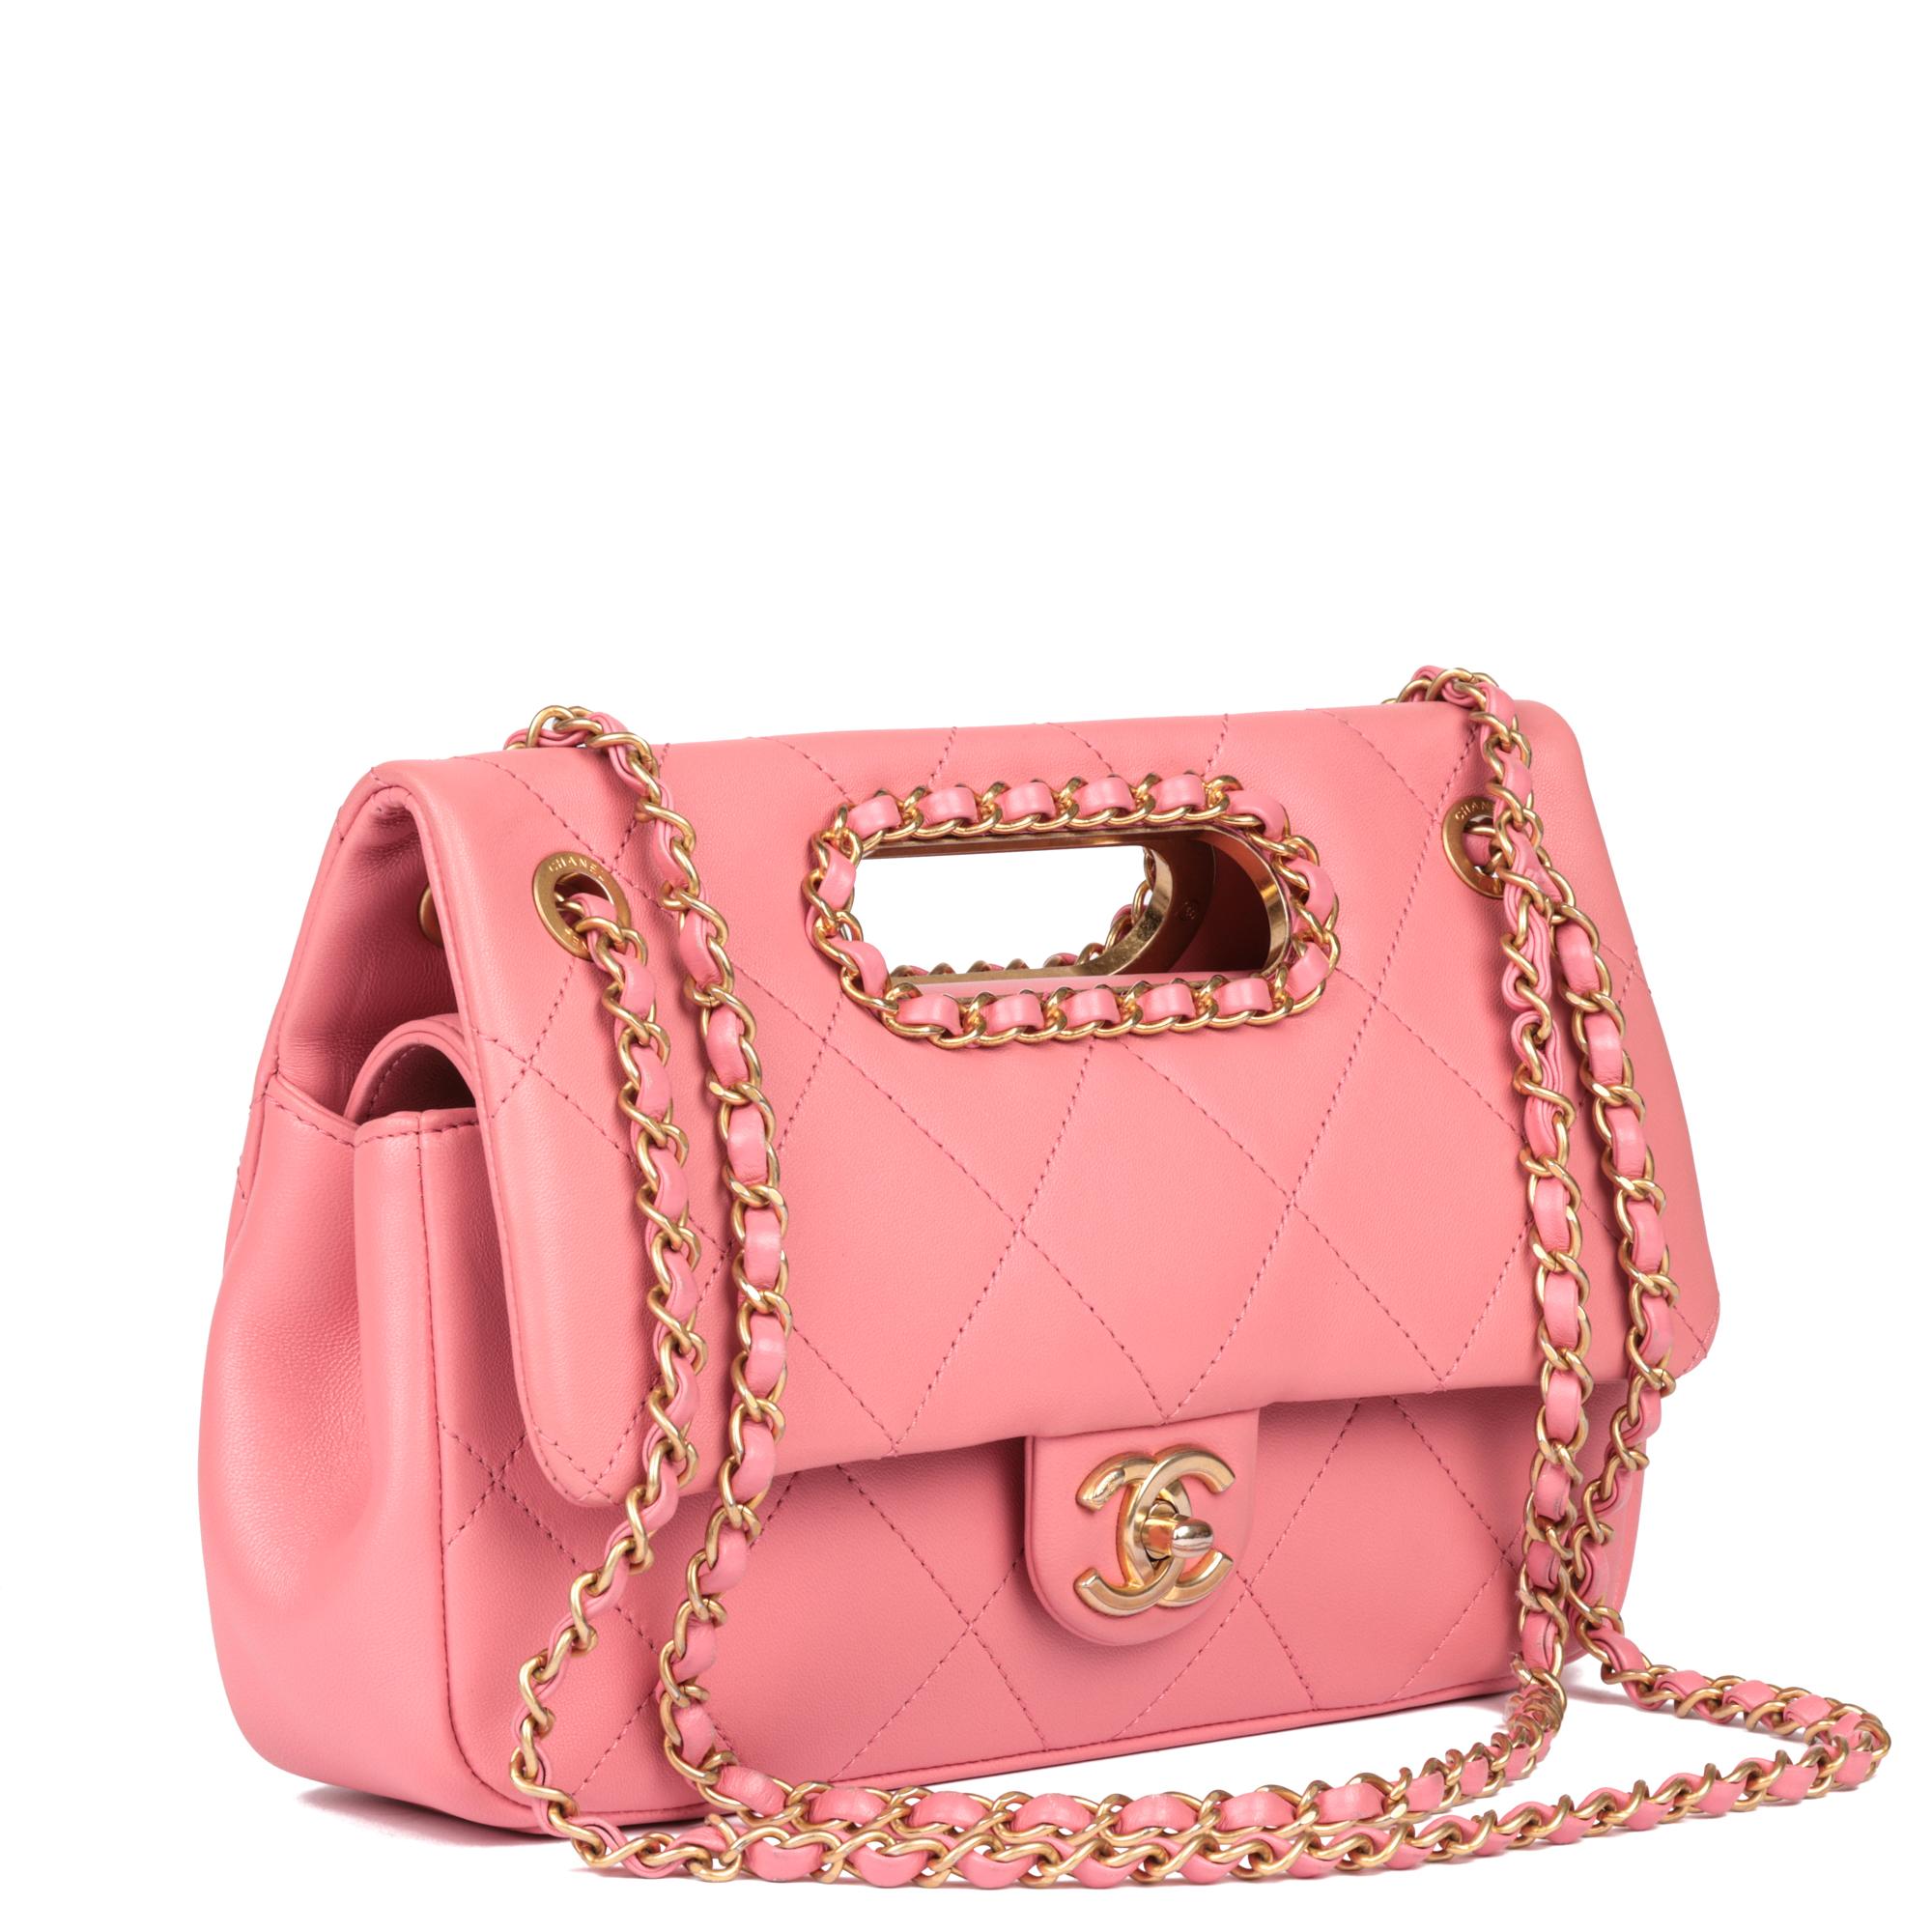 CHANEL
Pink Quilted Lambskin A Real Catch Classic Flap Bag

Xupes Reference: HB5130
Serial Number: 29554428
Age (Circa): 2019
Accompanied By: Chanel Dust Bag, Authenticity Card
Authenticity Details: Authenticity Card, Serial Sticker (Made in